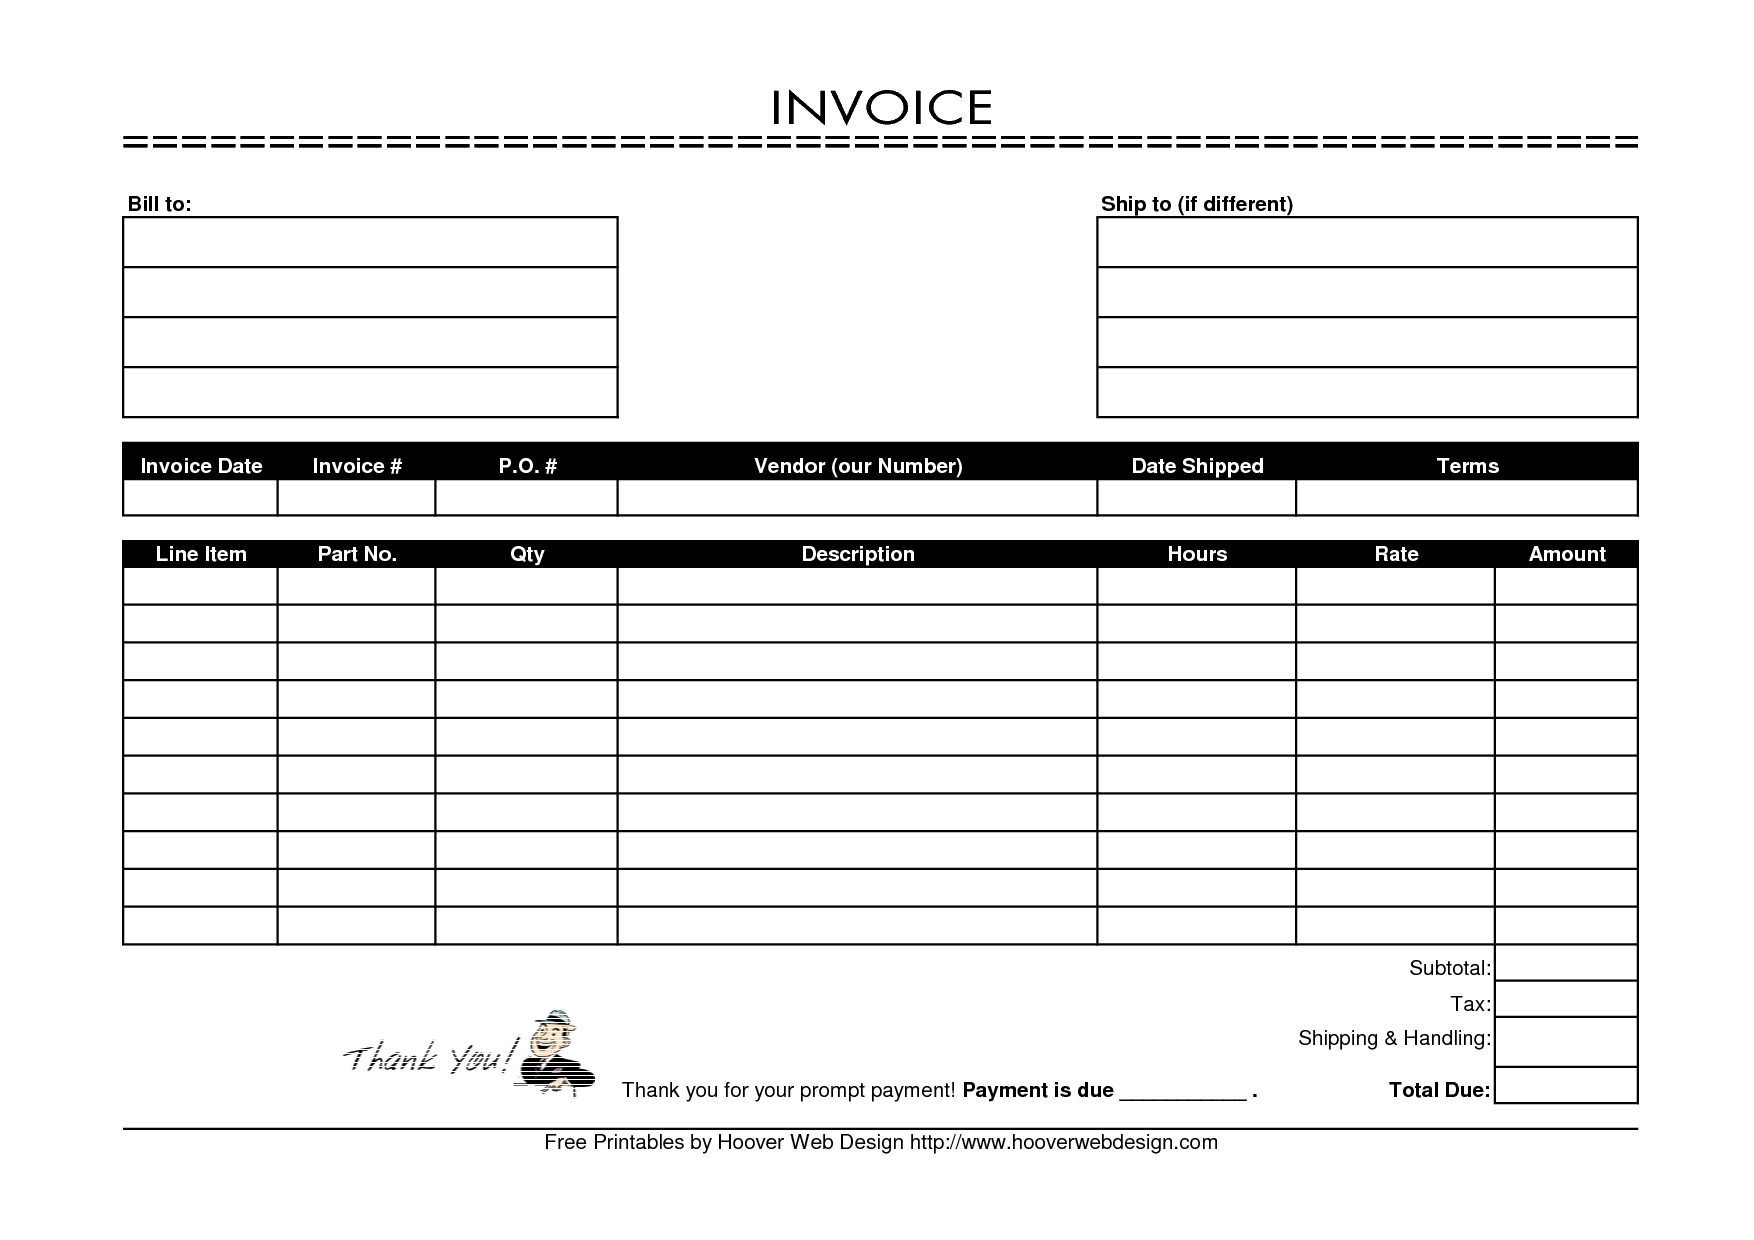 free printable invoice biomedical design engineer cover letter free blank printable invoices forms